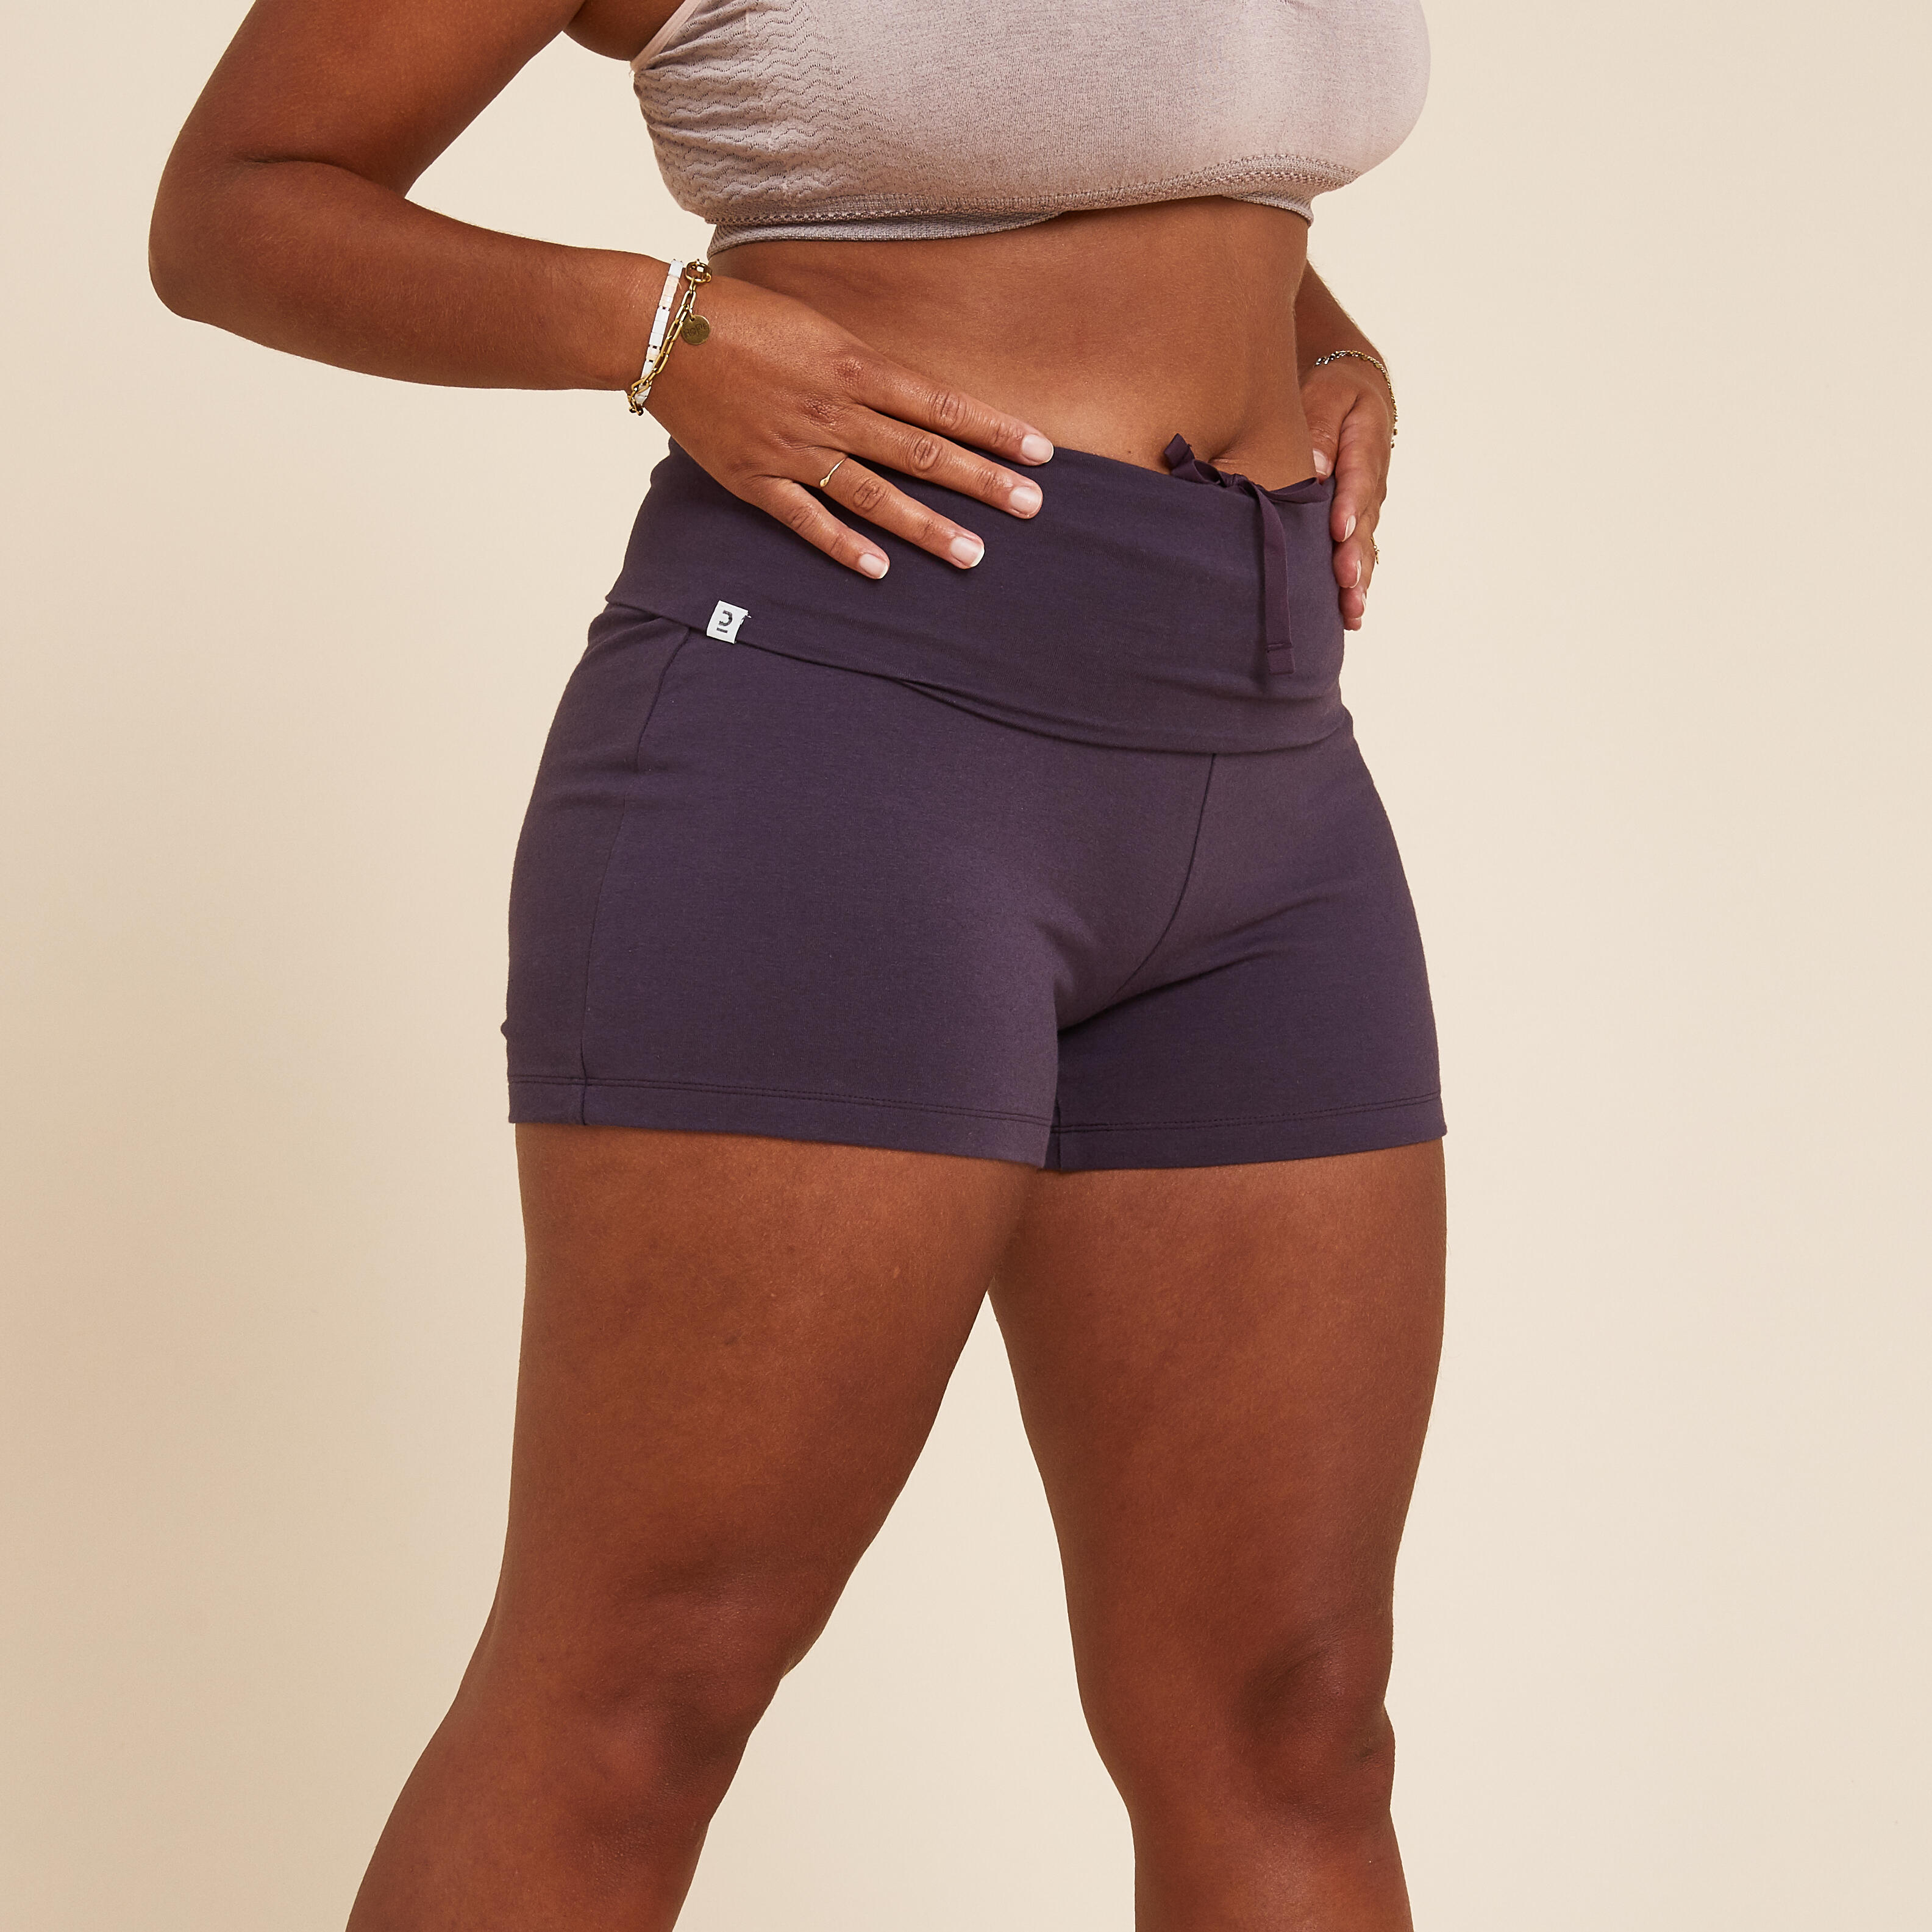 Buy F Fashiol.com Slip Shorts for Women Under Dress,Comfortable Smooth Yoga  Shorts,Workout Biker Shorts Online at Best Prices in India - JioMart.